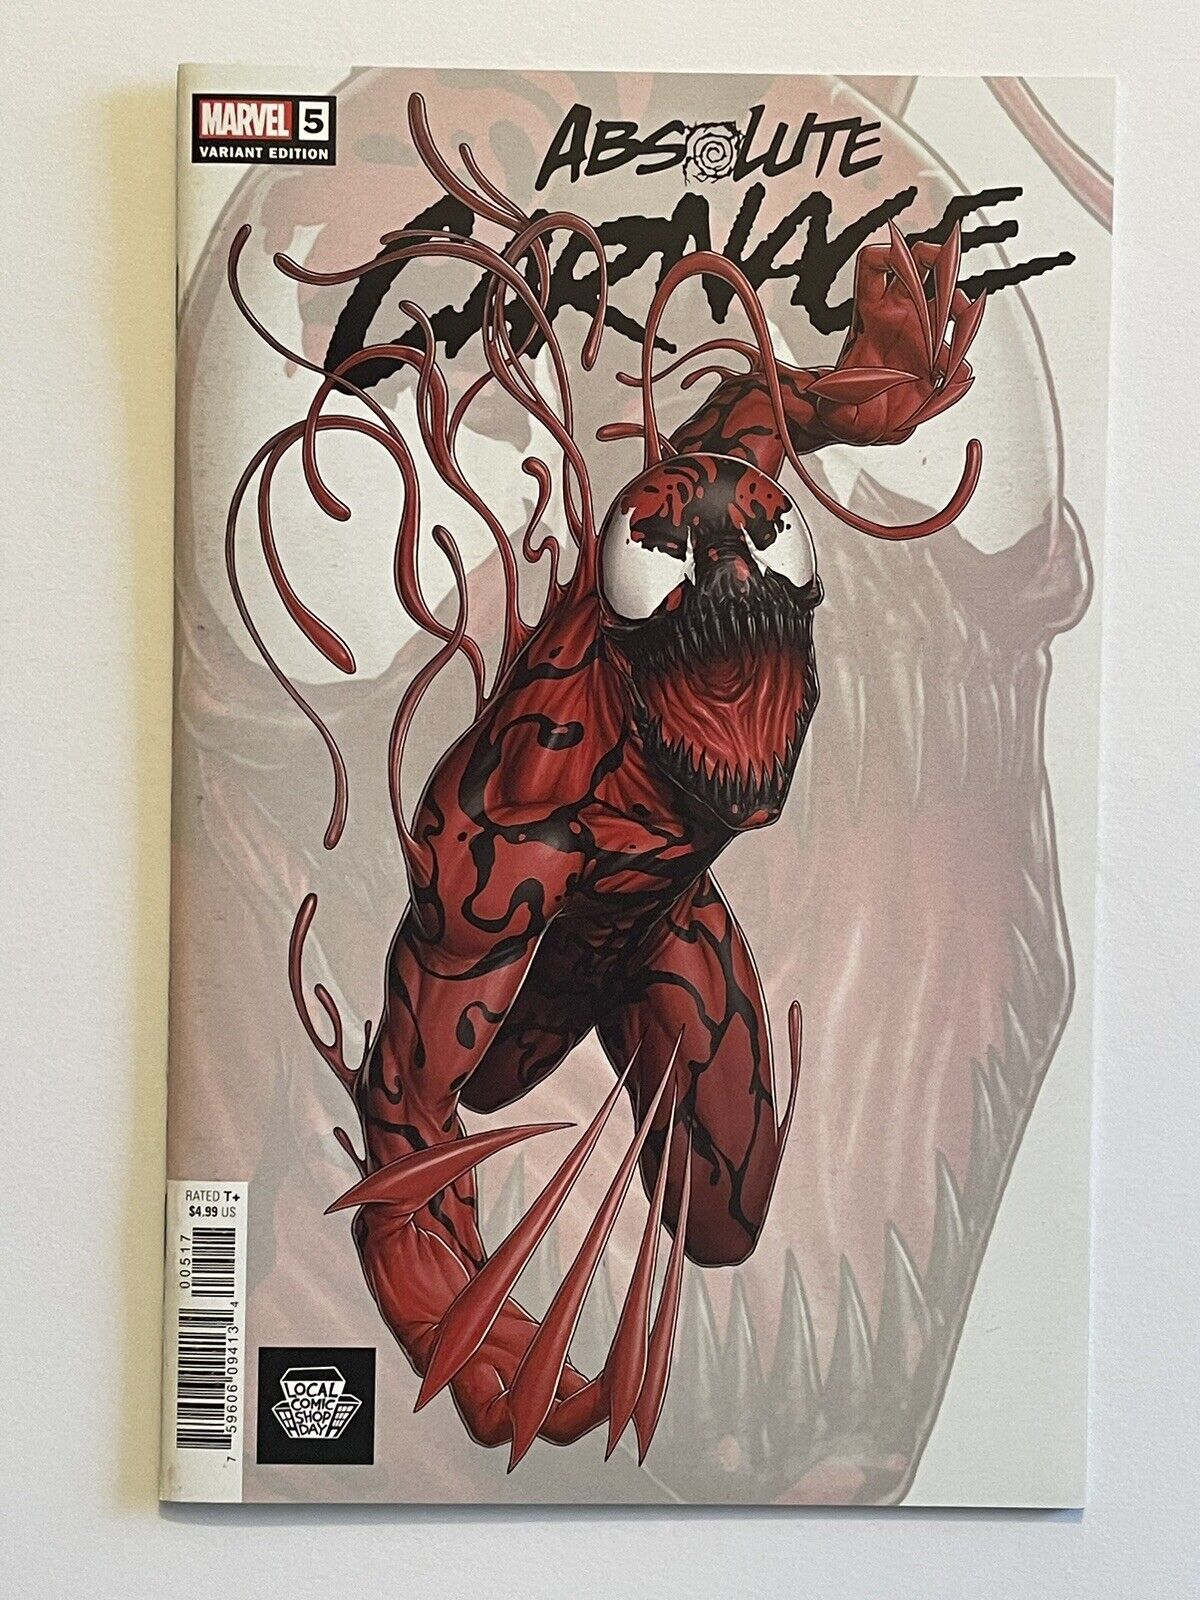 ABSOLUTE CARNAGE #5 LCSD EXCLUSIVE CHRISTOPHER VARIANT MARVEL 2019 LCSD